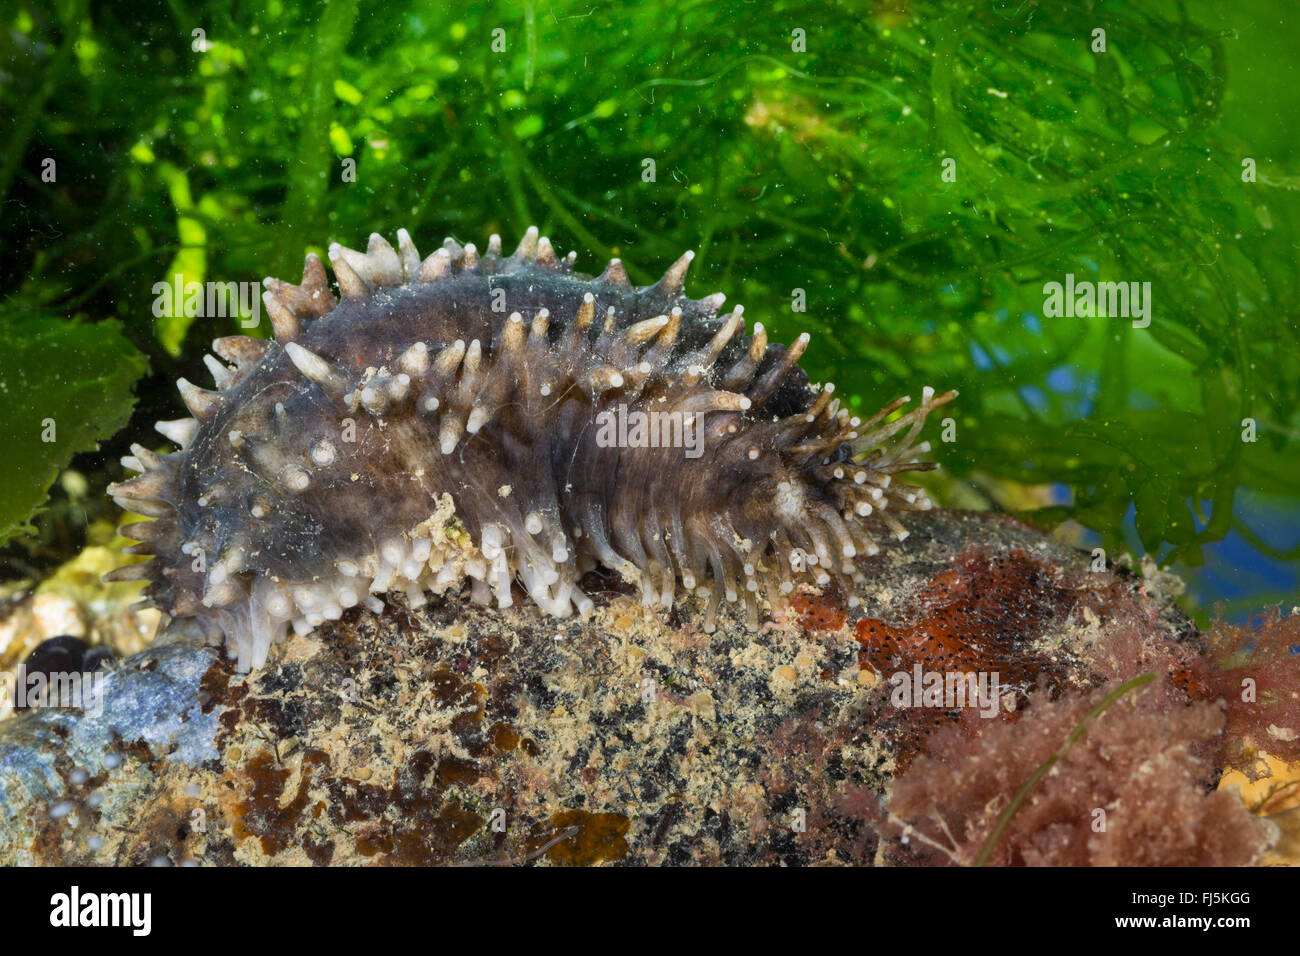 Seegurken High Resolution Stock Photography and Images - Alamy